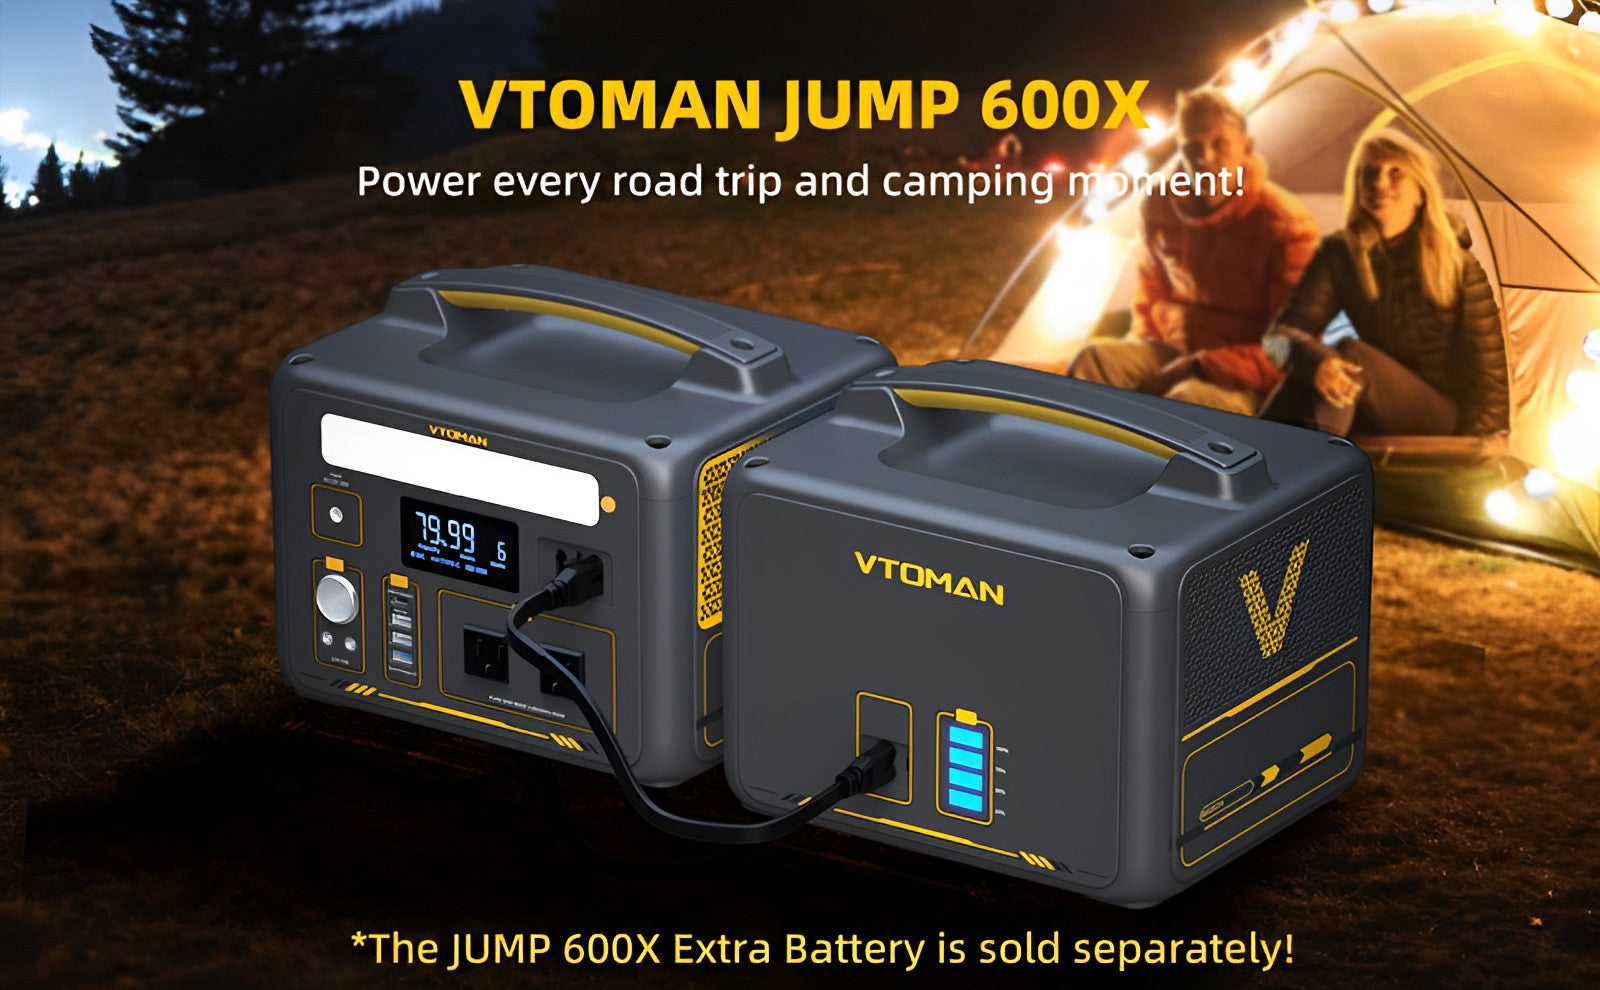 VTOMAN Jump600X portable power station has a capacity of 299Wh, and it can be further expanded to 939Wh